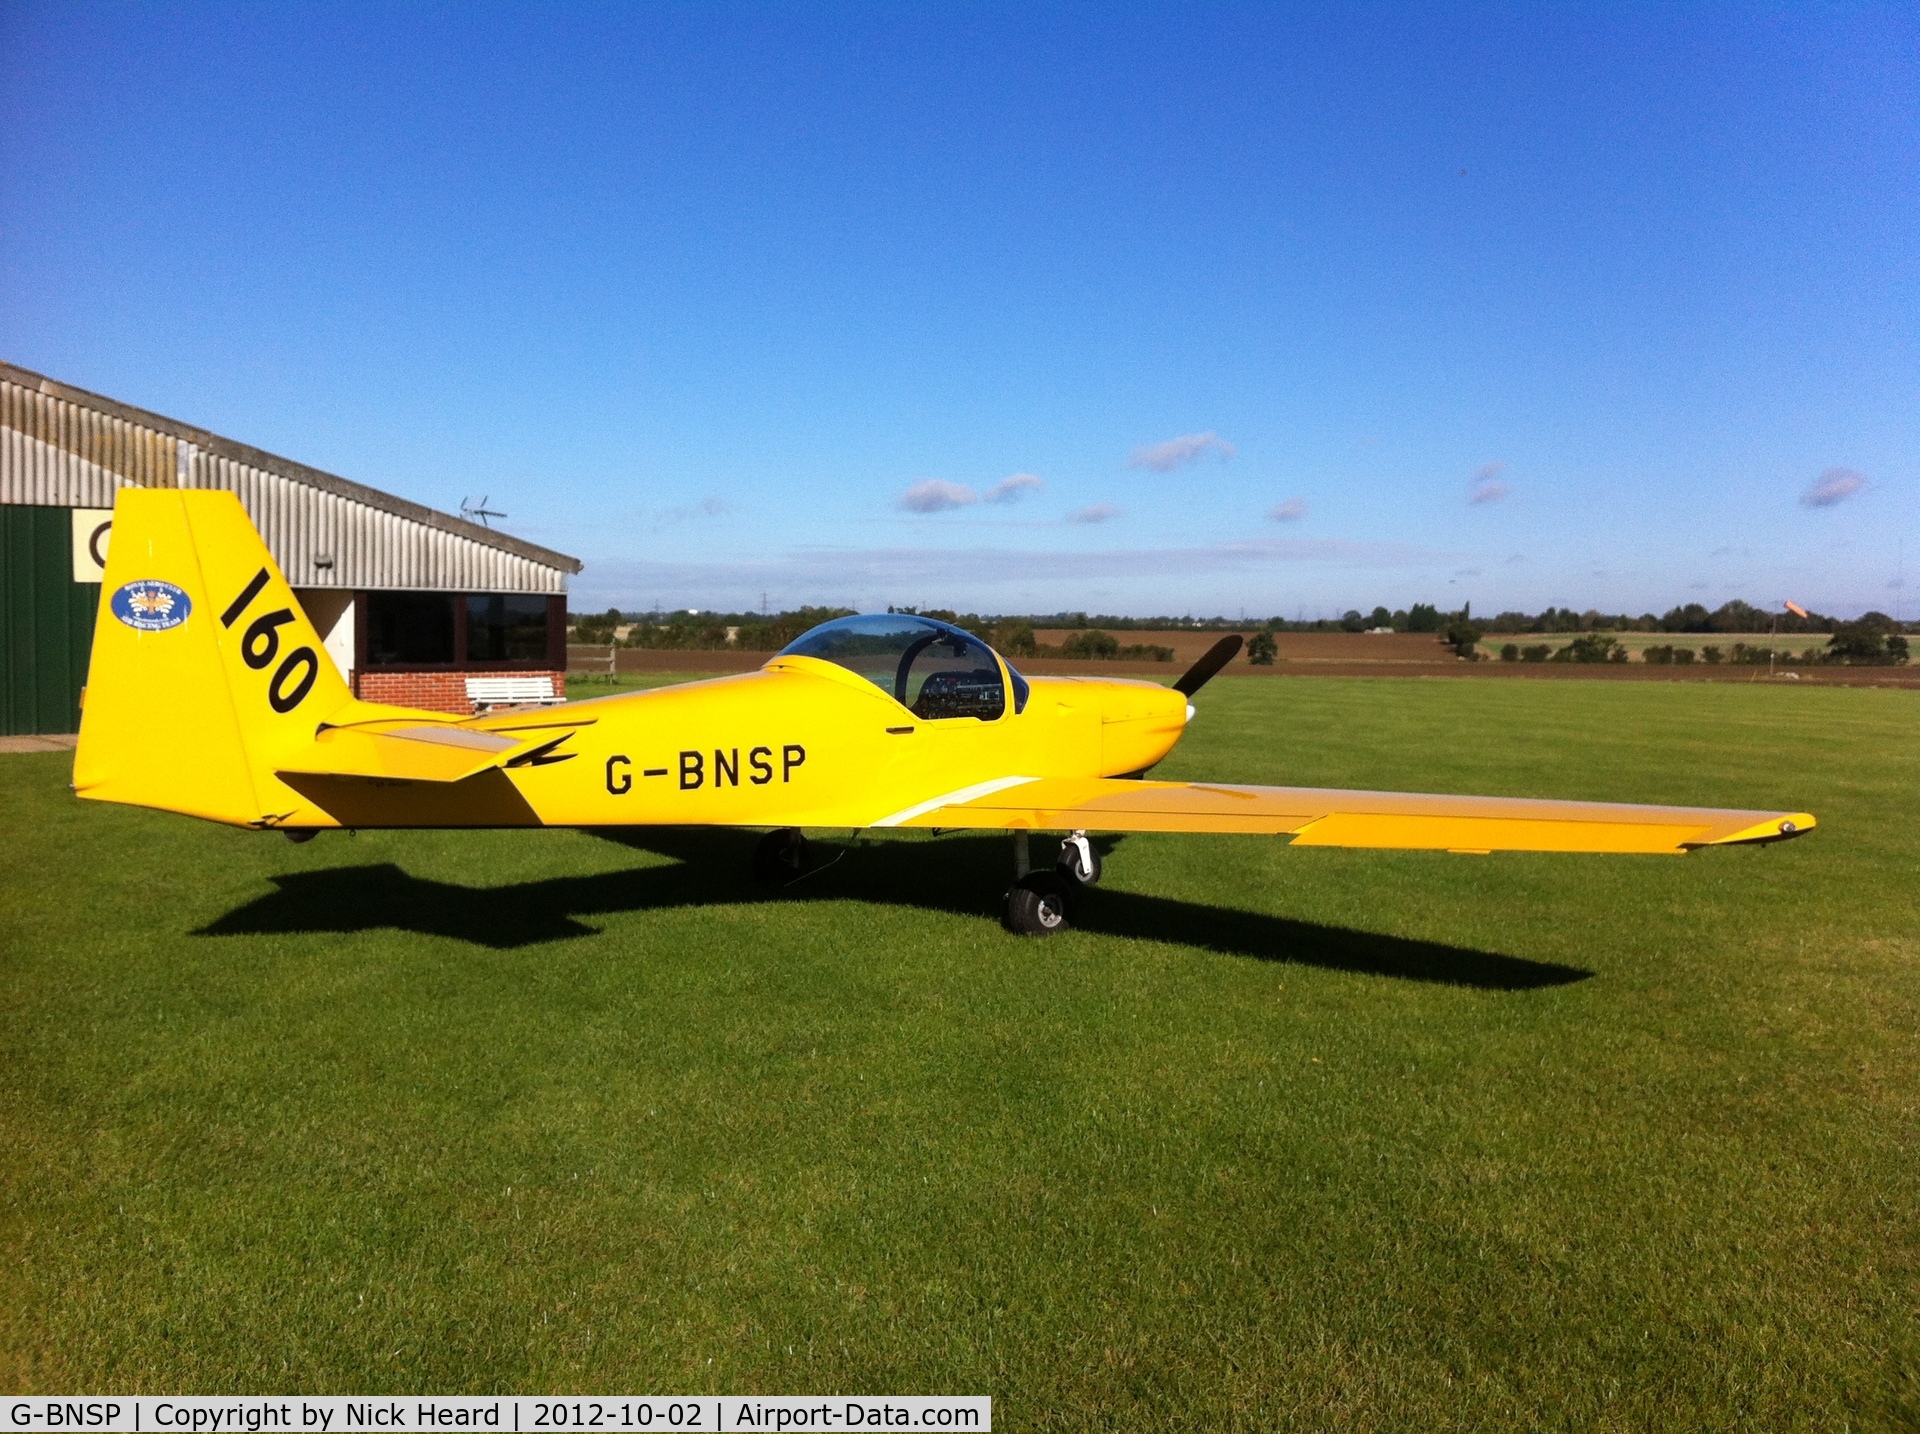 G-BNSP, 1987 Slingsby T-67M Firefly Mk2 C/N 2044, Now based at Crowfield Airfield, Suffolk